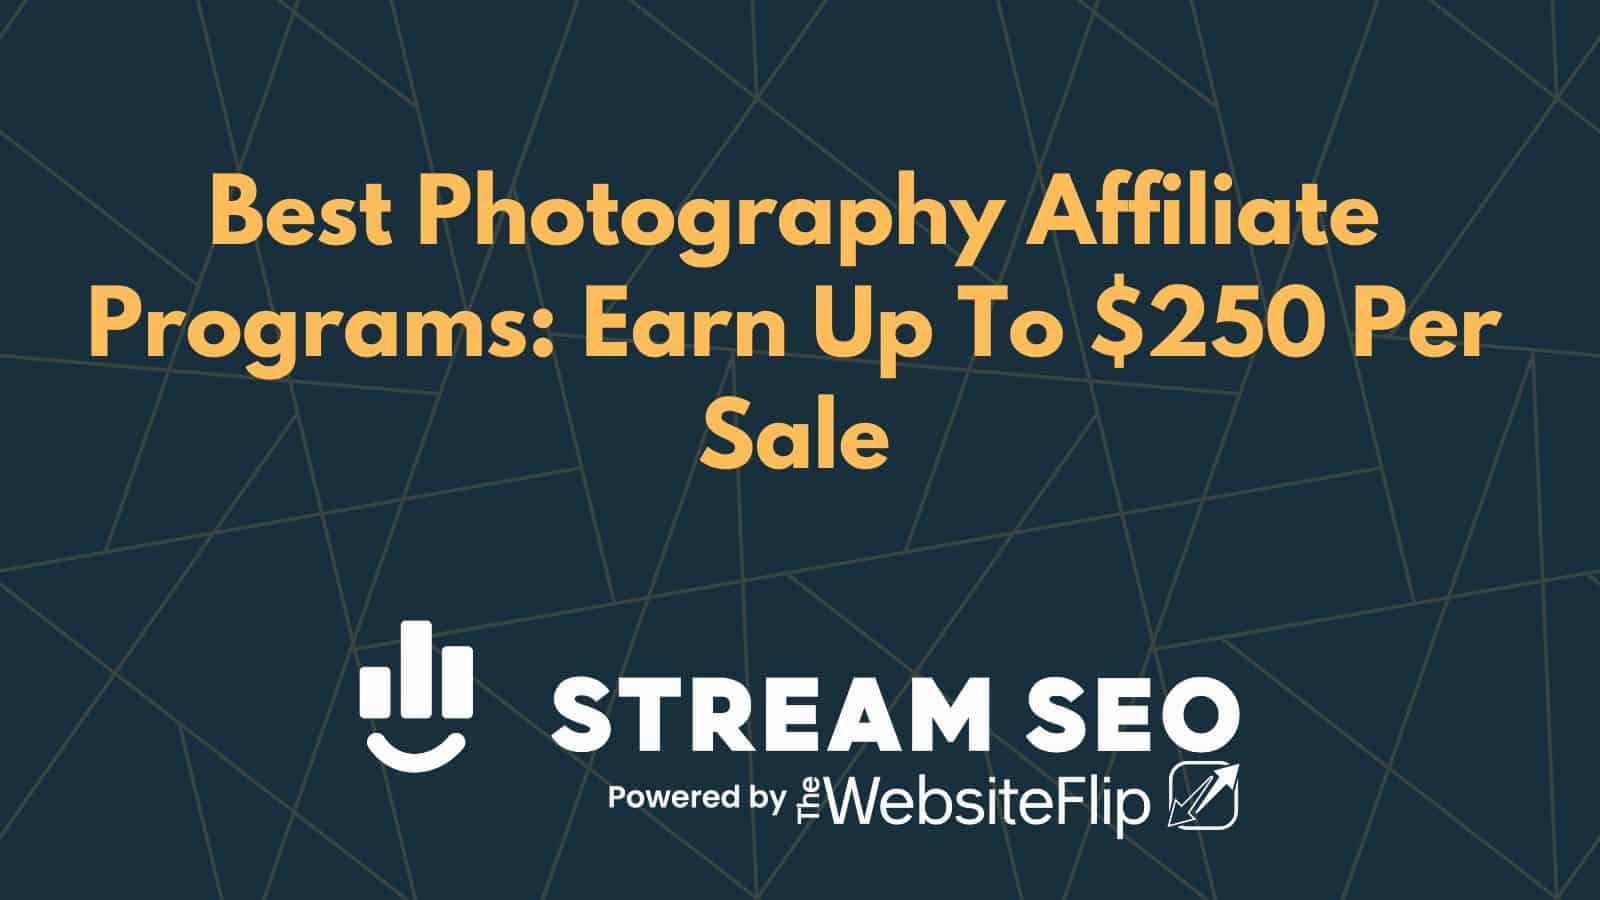 8 Best Photography Affiliate Programs: Earn Up To $250 Per Sale